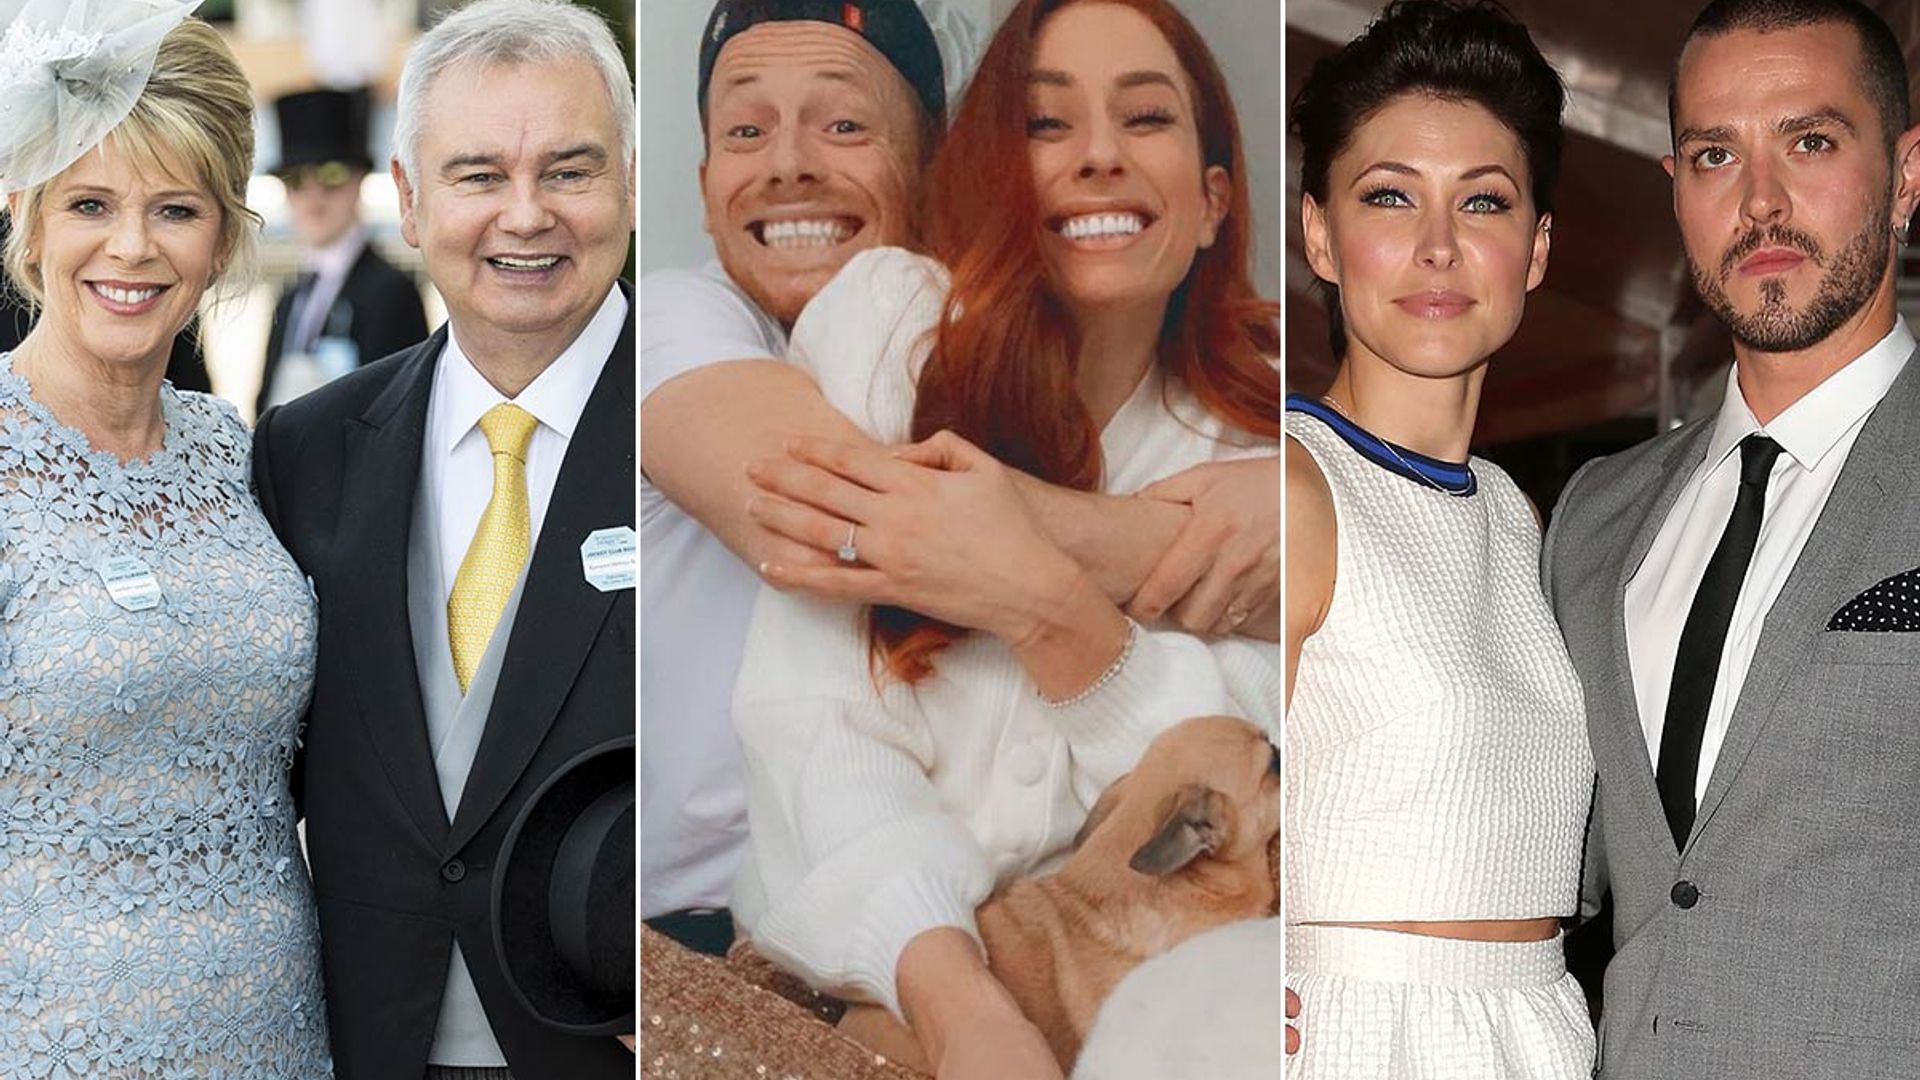 6 celebrity proposal mishaps: From Ruth Langsford to Emma Willis